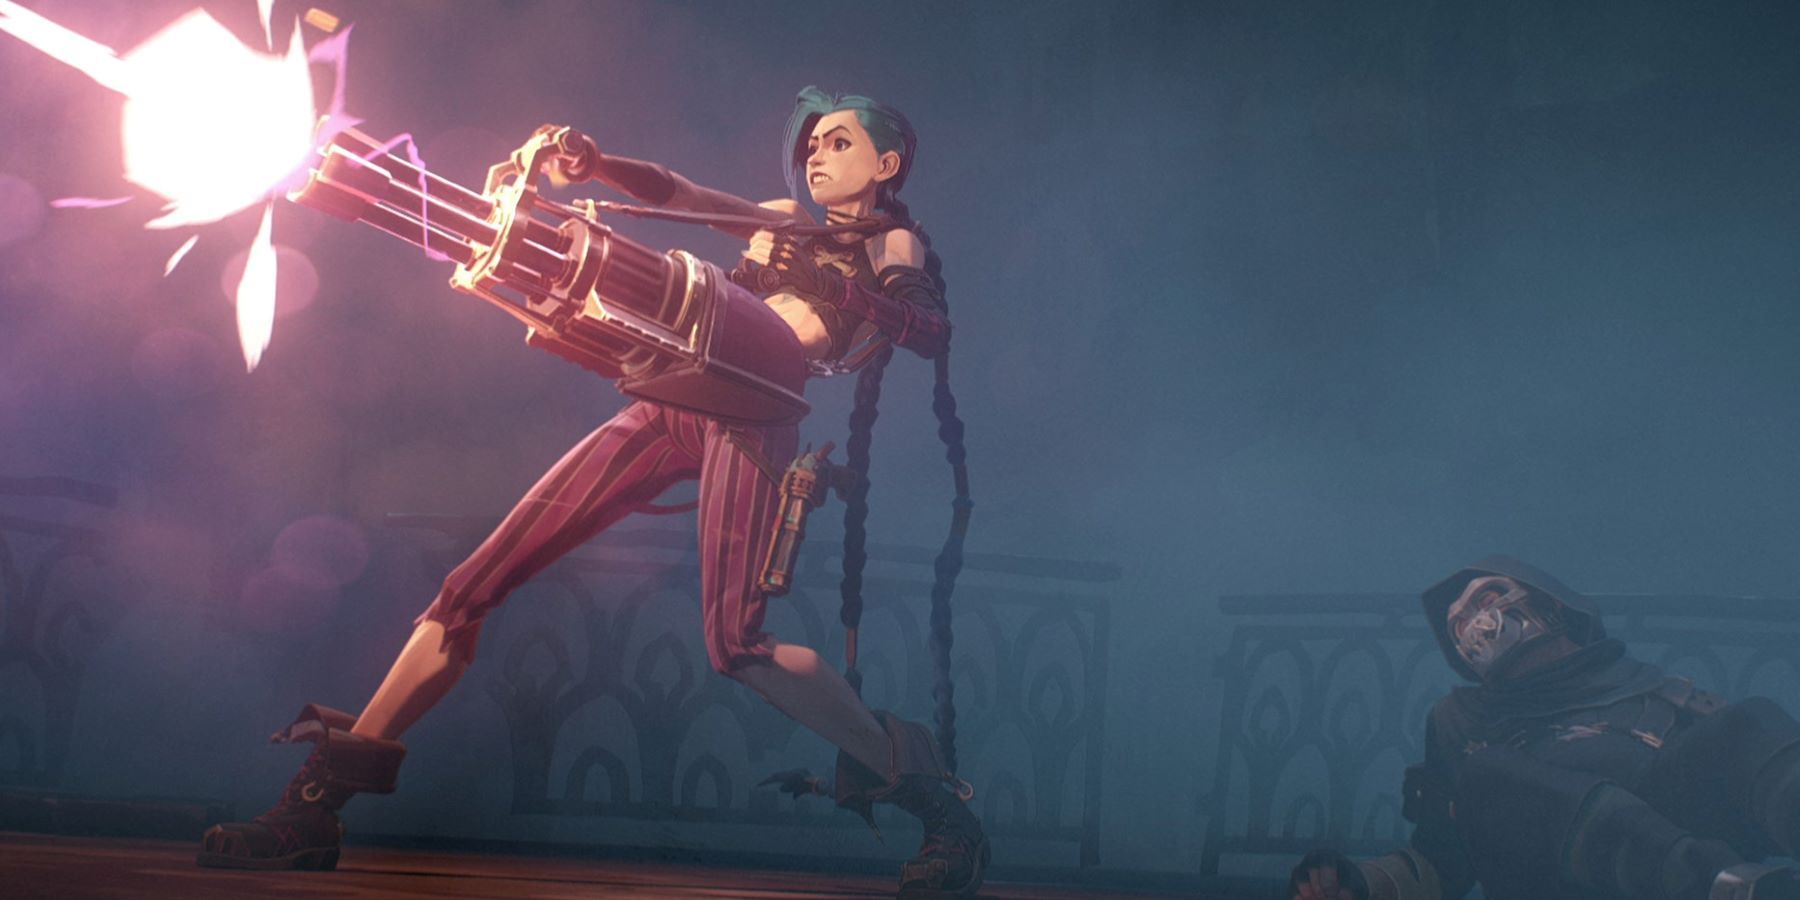 How to Build League of Legends' Jinx in Dungeons & Dragons